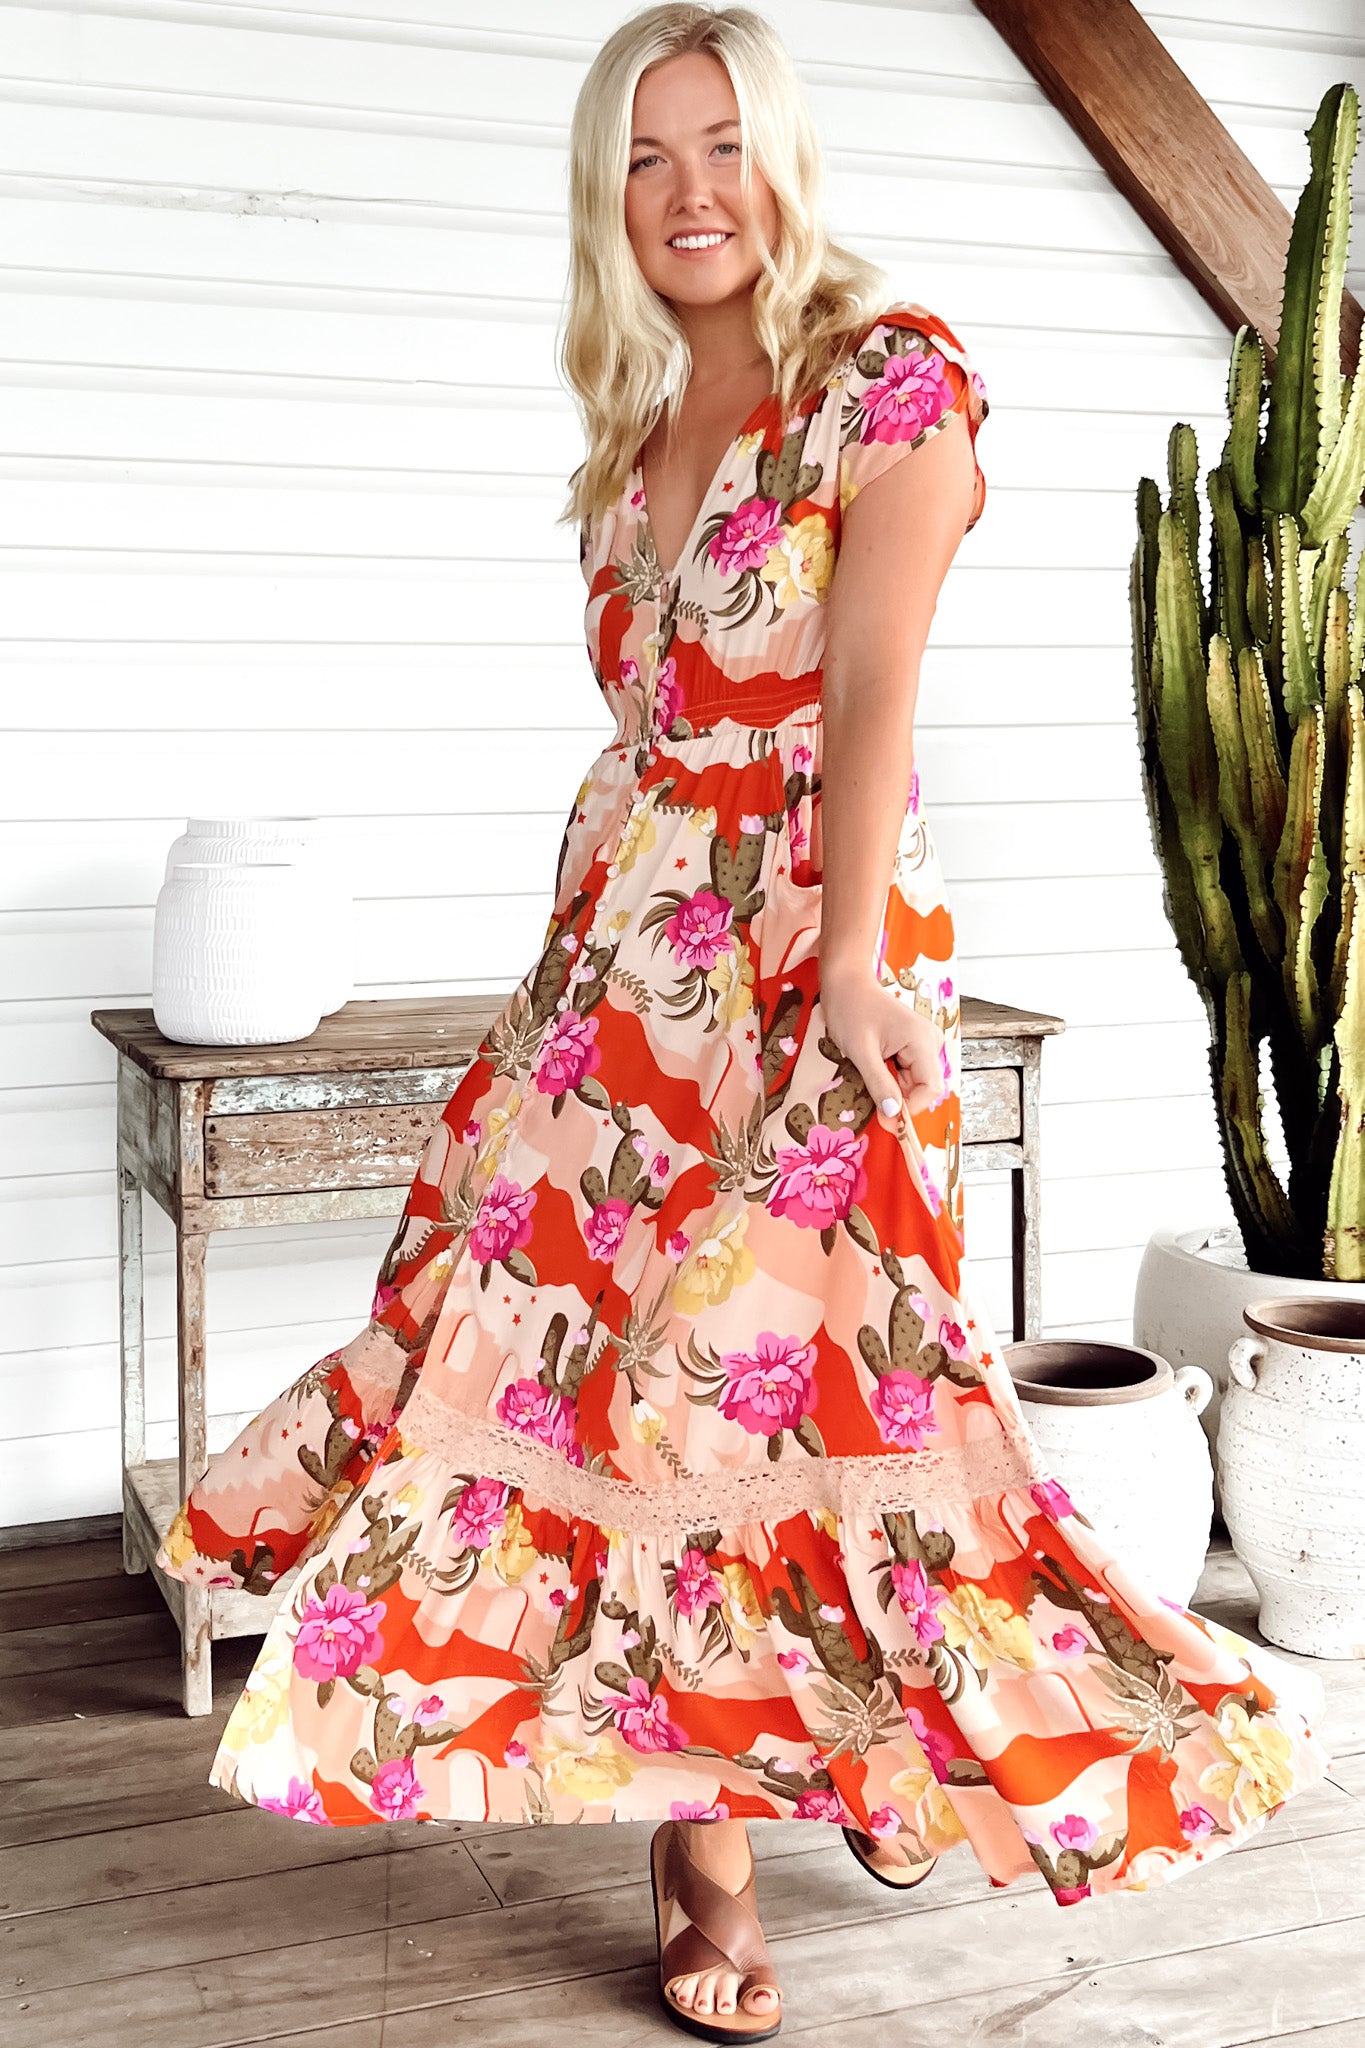 JAASE - Carmen Maxi Dress: Butterfly Cap Sleeve Button Down A Line Dress with Lace Trim in Agave Print